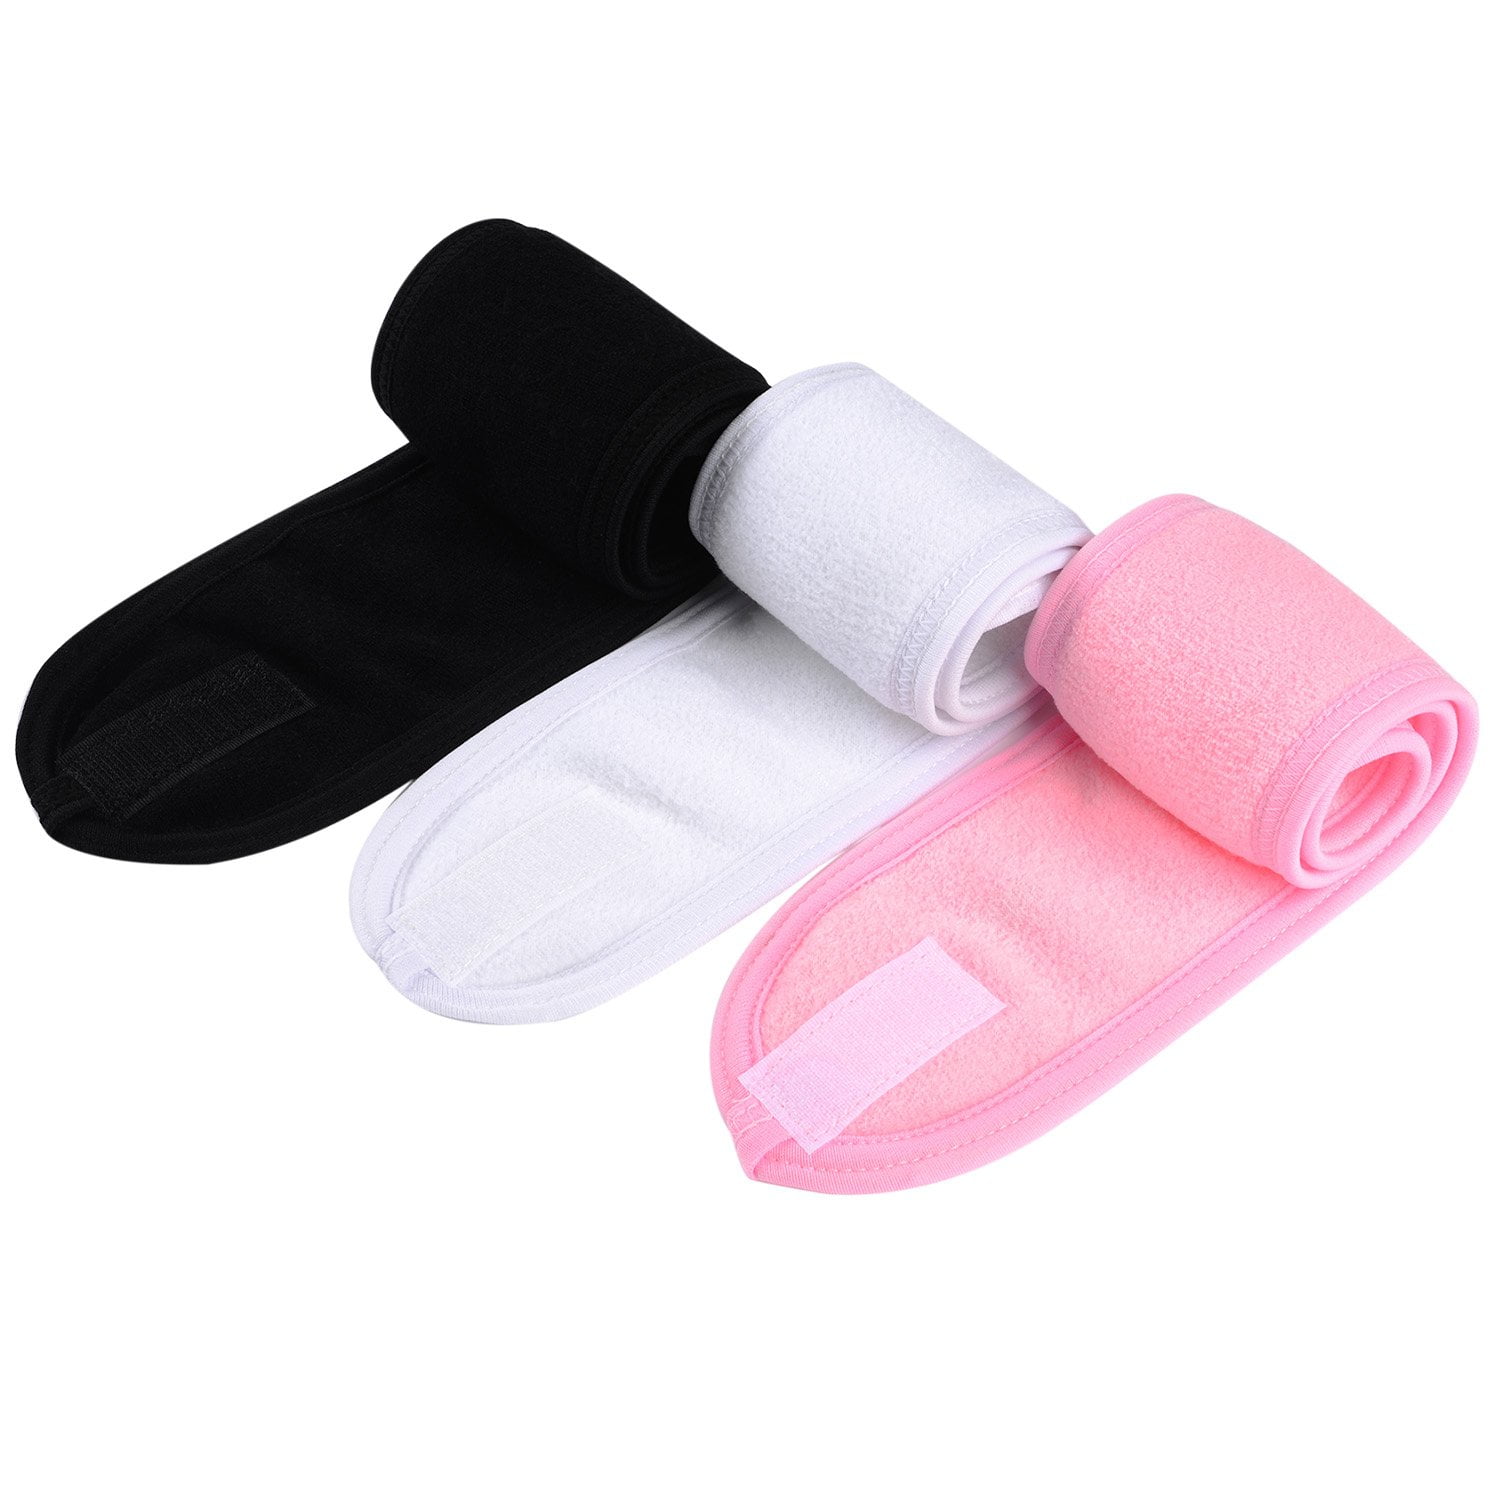 Adjustable Makeup Headband Hair Bands Wash Face Hair Holder Soft Toweling  Facial Hairband Bath SPA Hair Accessories For Women U3|Shower Caps|  AliExpress | Niuniu Towel Headband For Women, Facial Headband For Washing